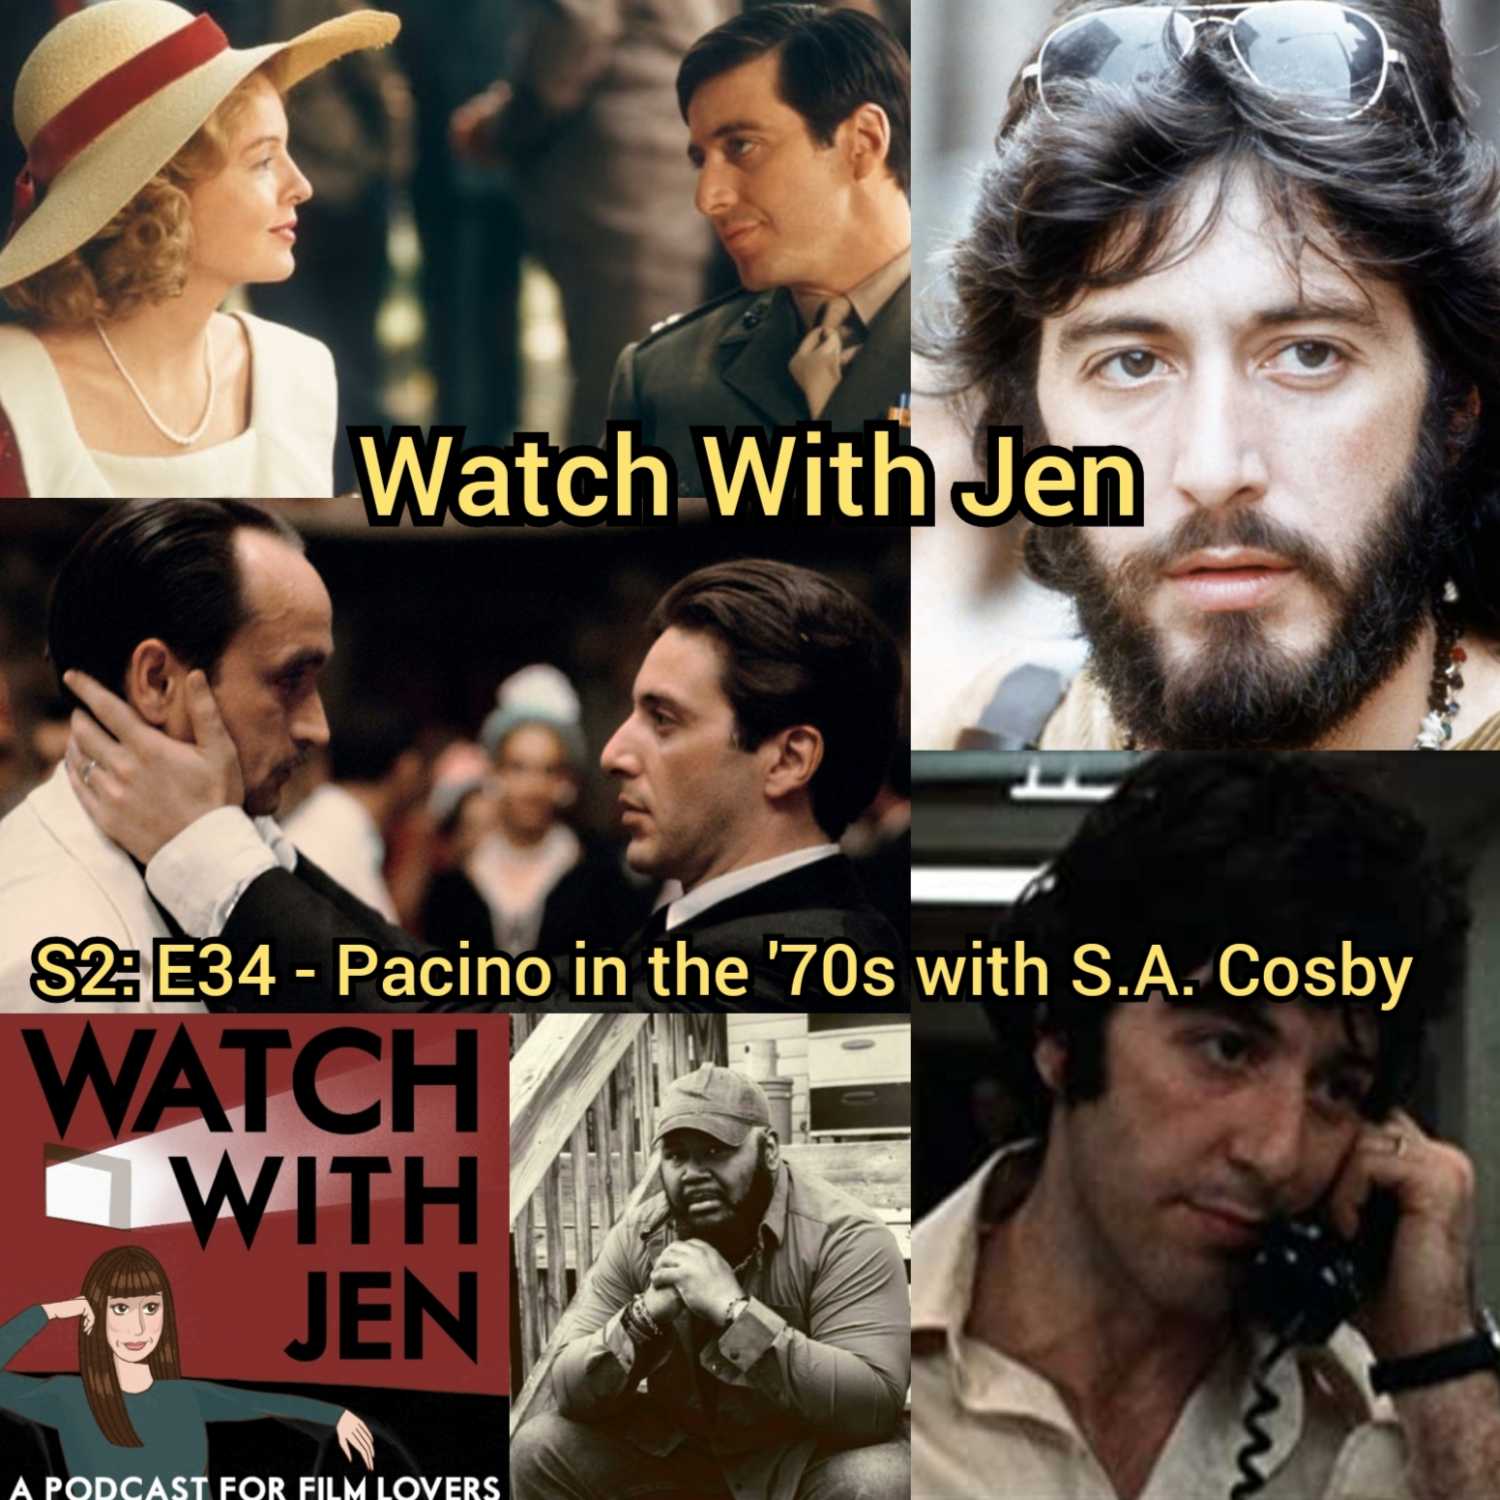 Watch With Jen - S2: E34 - Pacino in the '70s with S.A. Cosby